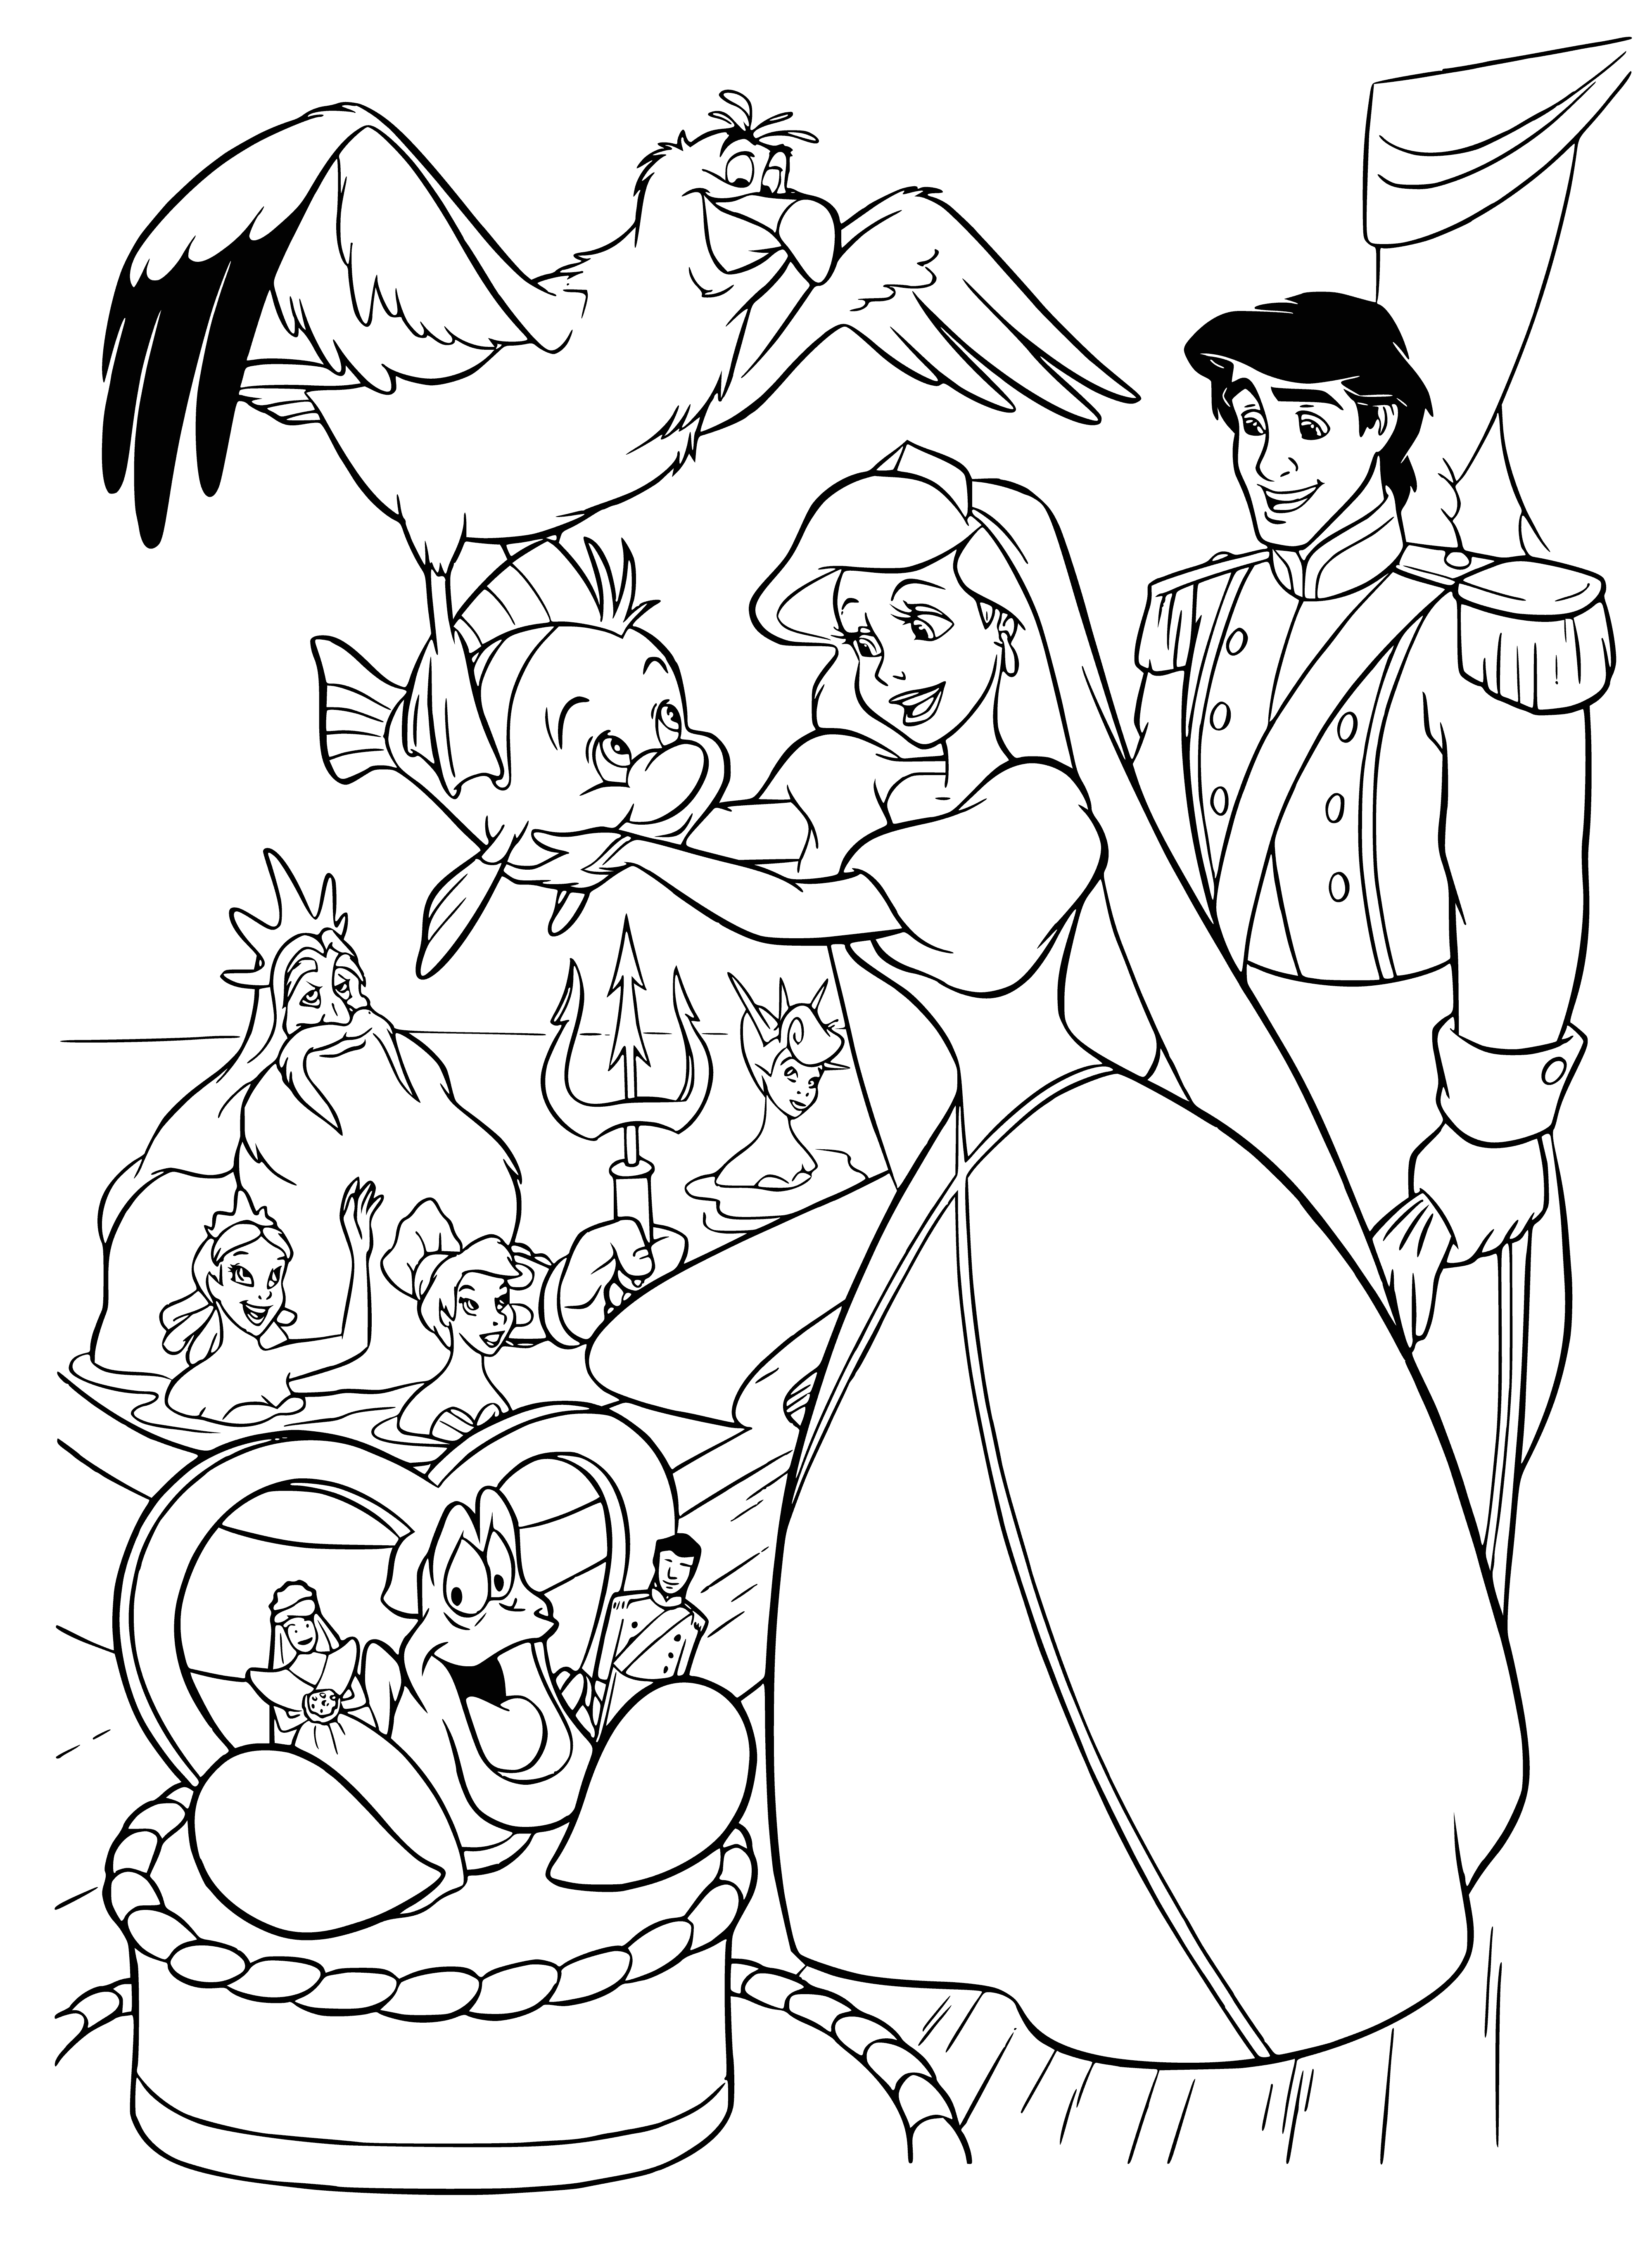 The wedding of the prince and the little mermaid coloring page